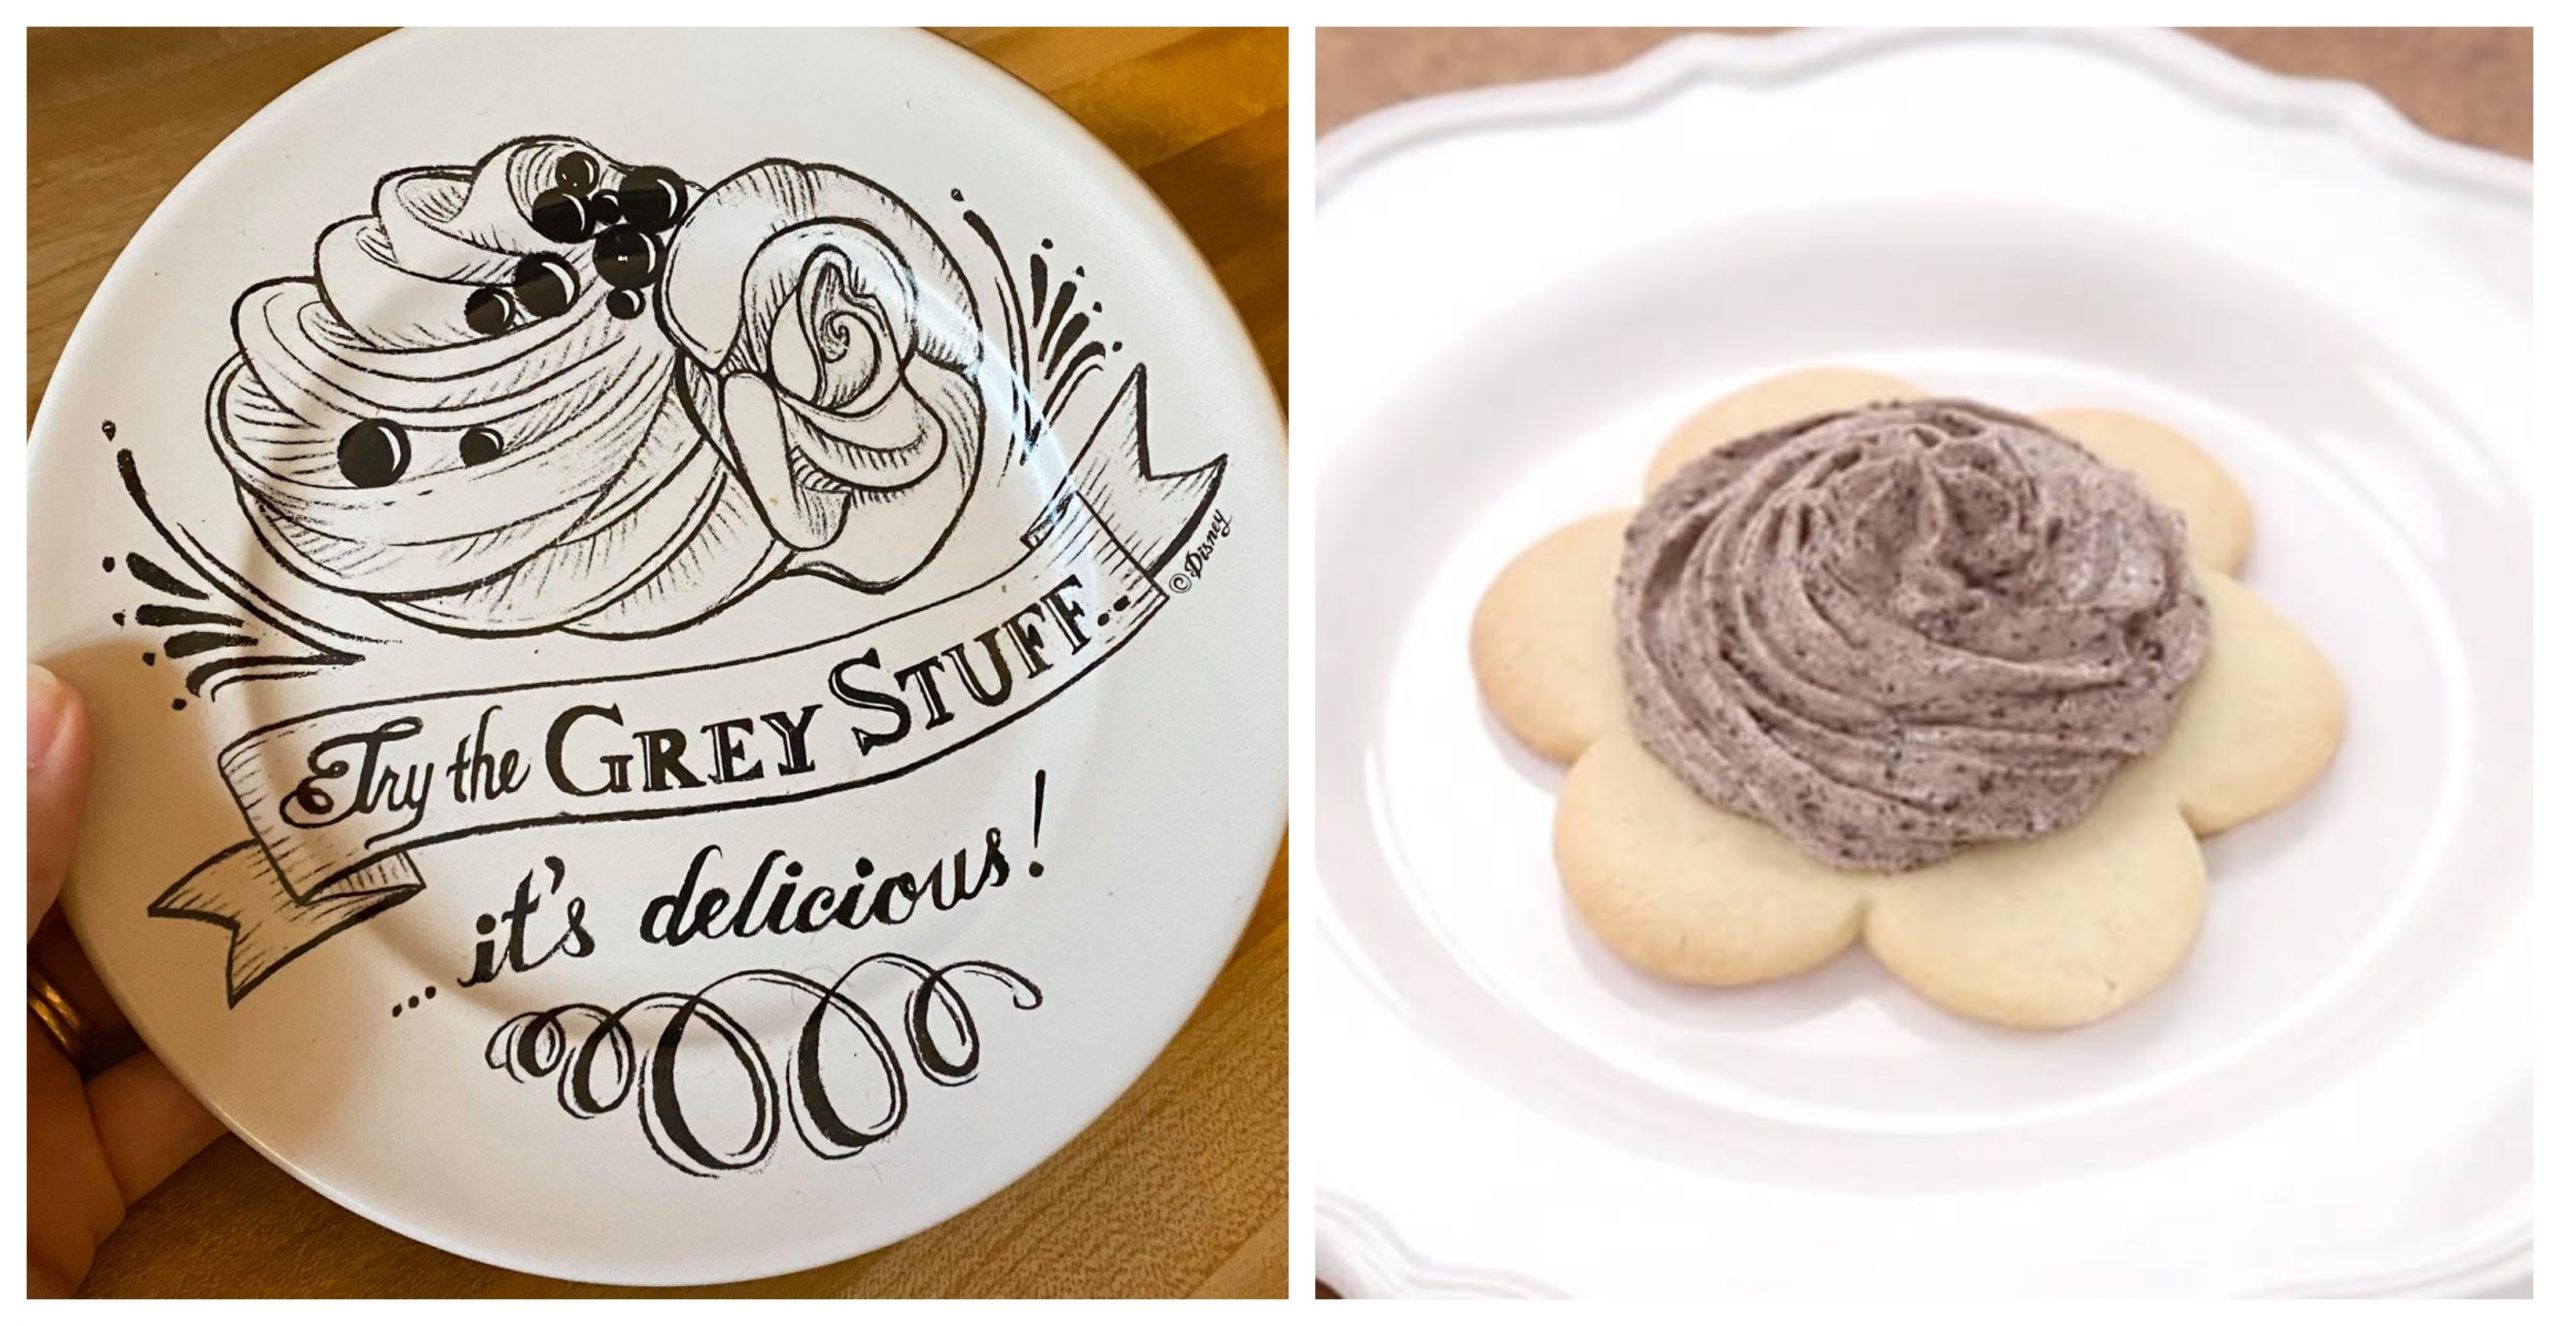 Try this at home – Disney’s Grey Stuff Recipe